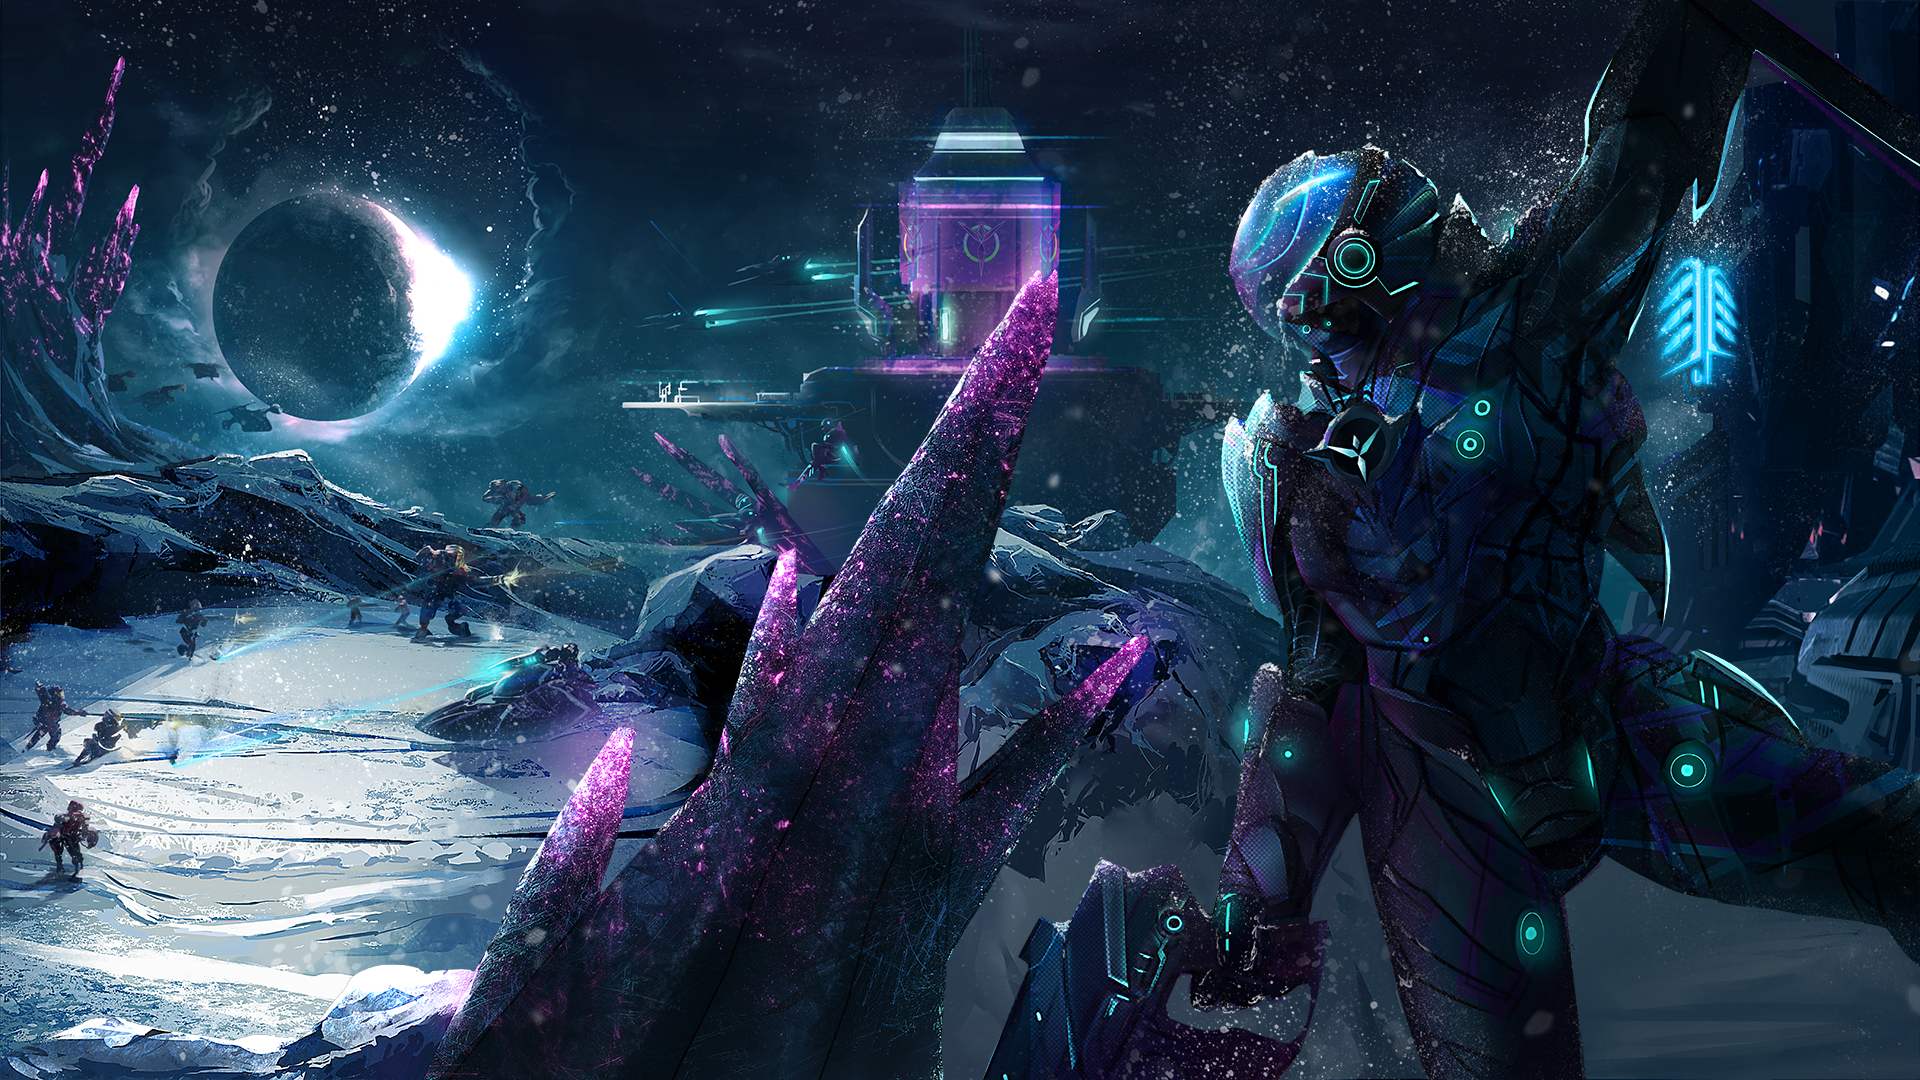 General 1920x1080 science fiction futuristic battle space ice spaceship robot Planetside 2 Vanu Sovereignty video games PC gaming video game art